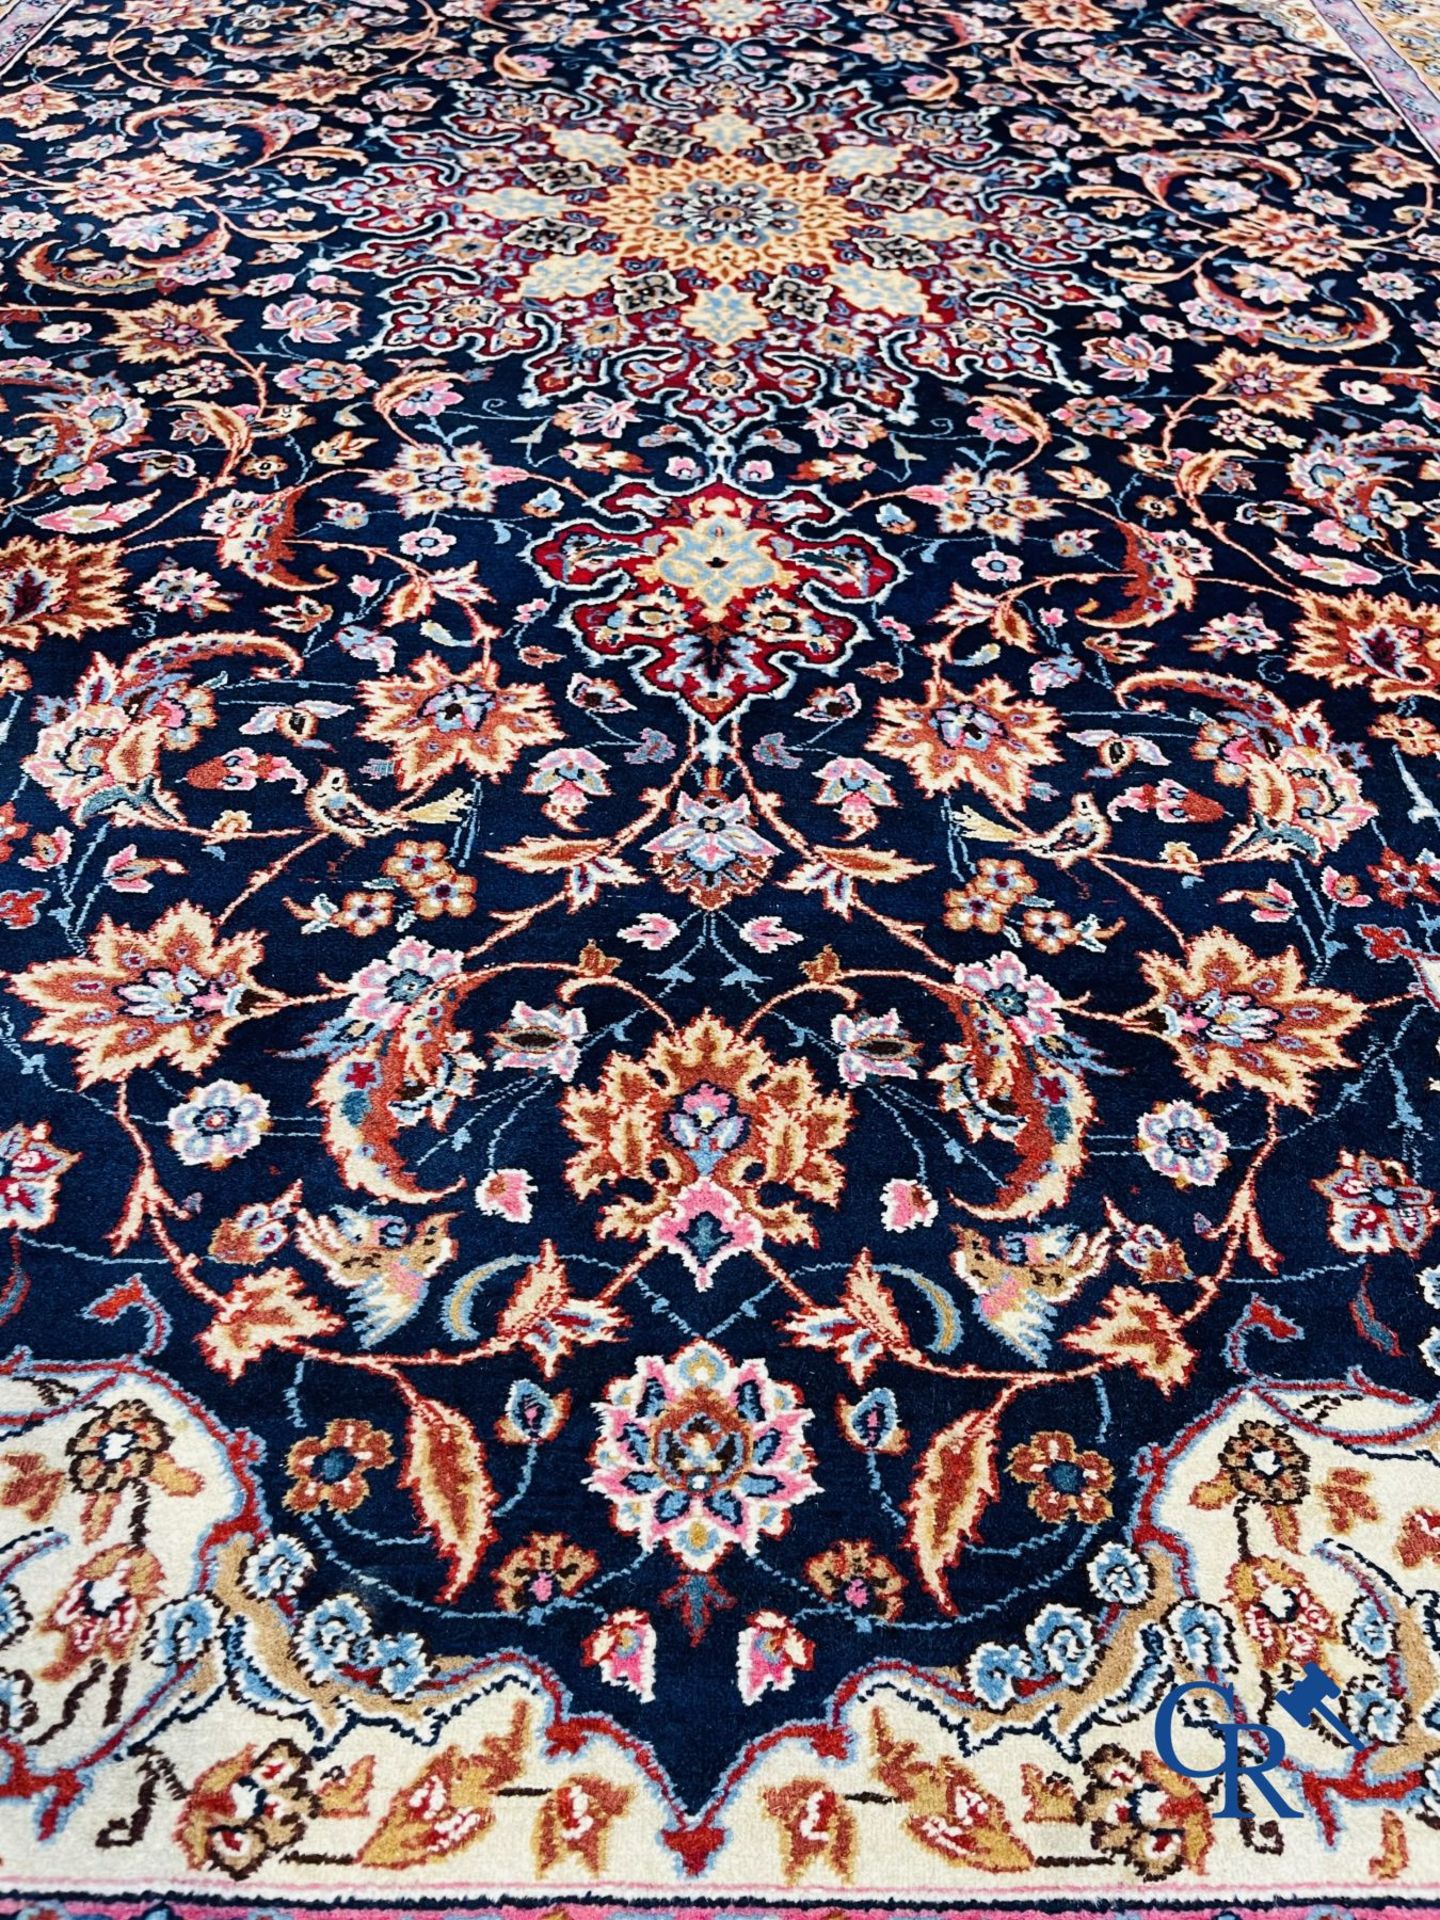 Oriental carpets: Isfahan, Iran. Large hand-knotted Persian carpet. - Image 4 of 11